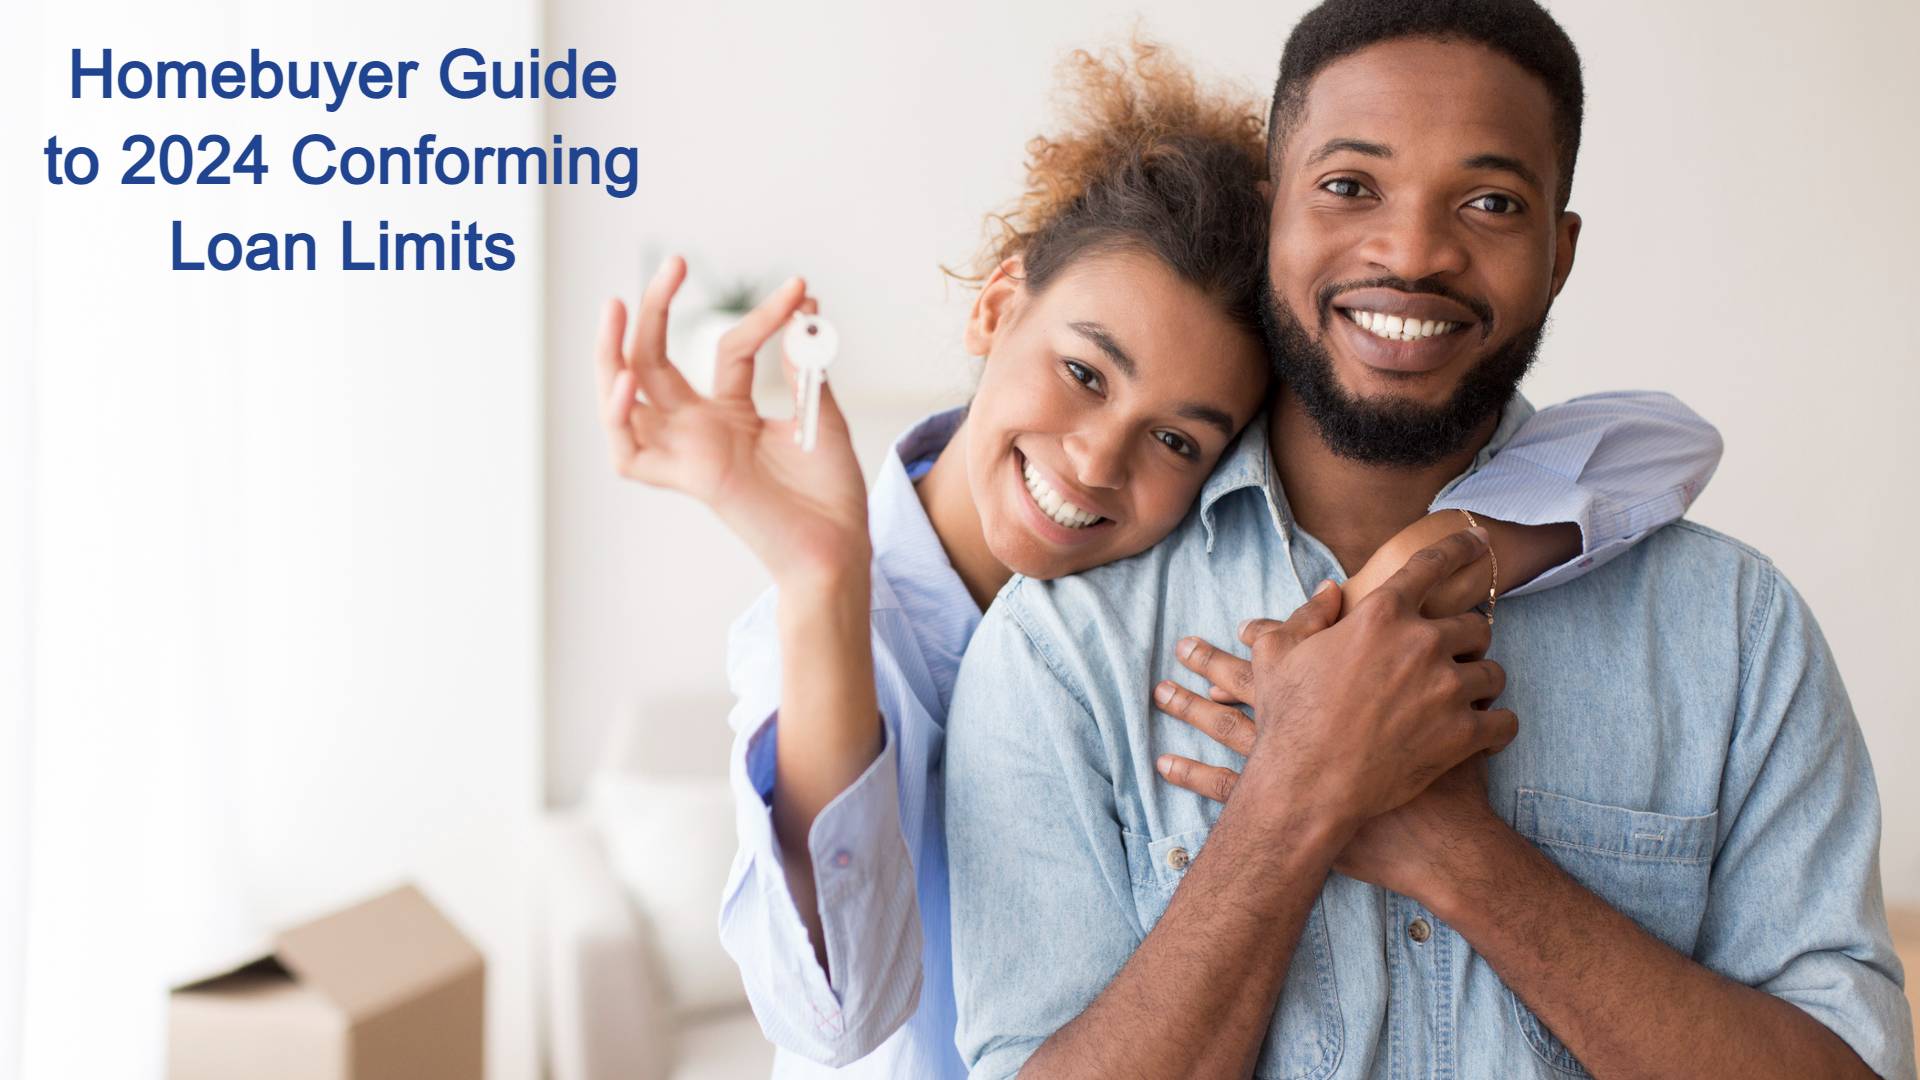 Homebuyer Guide to 2024 Conventional Conforming Mortgage Loan Limits